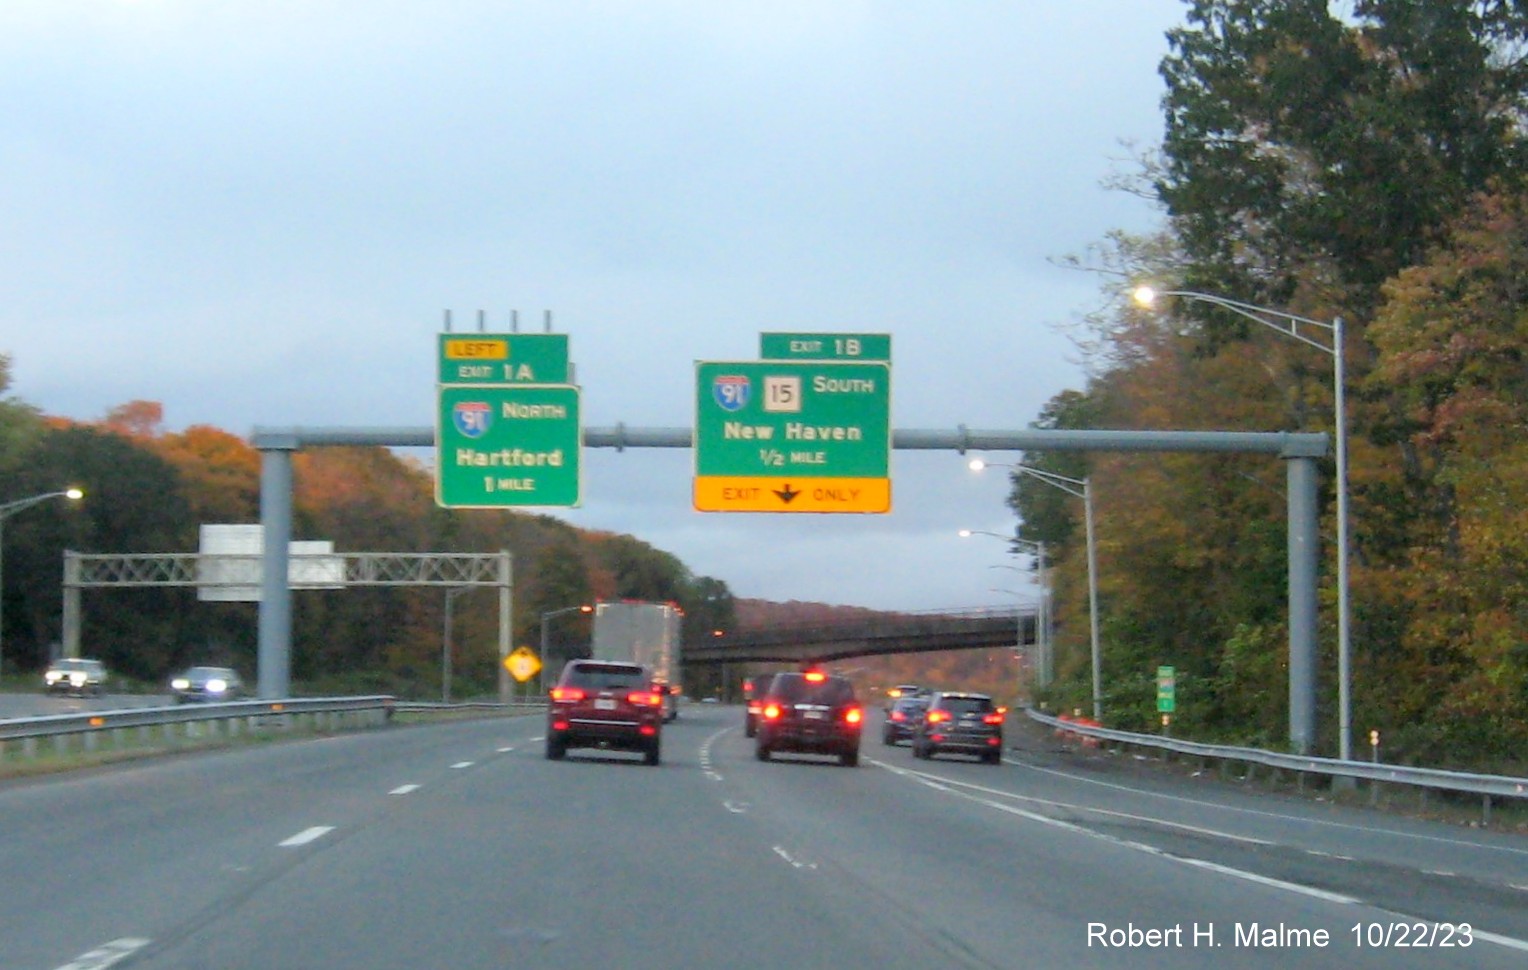 Image of new 1/2 mile advance sign for the I-91/CT 15 exits with the new milepost based exit numbers, October 2023